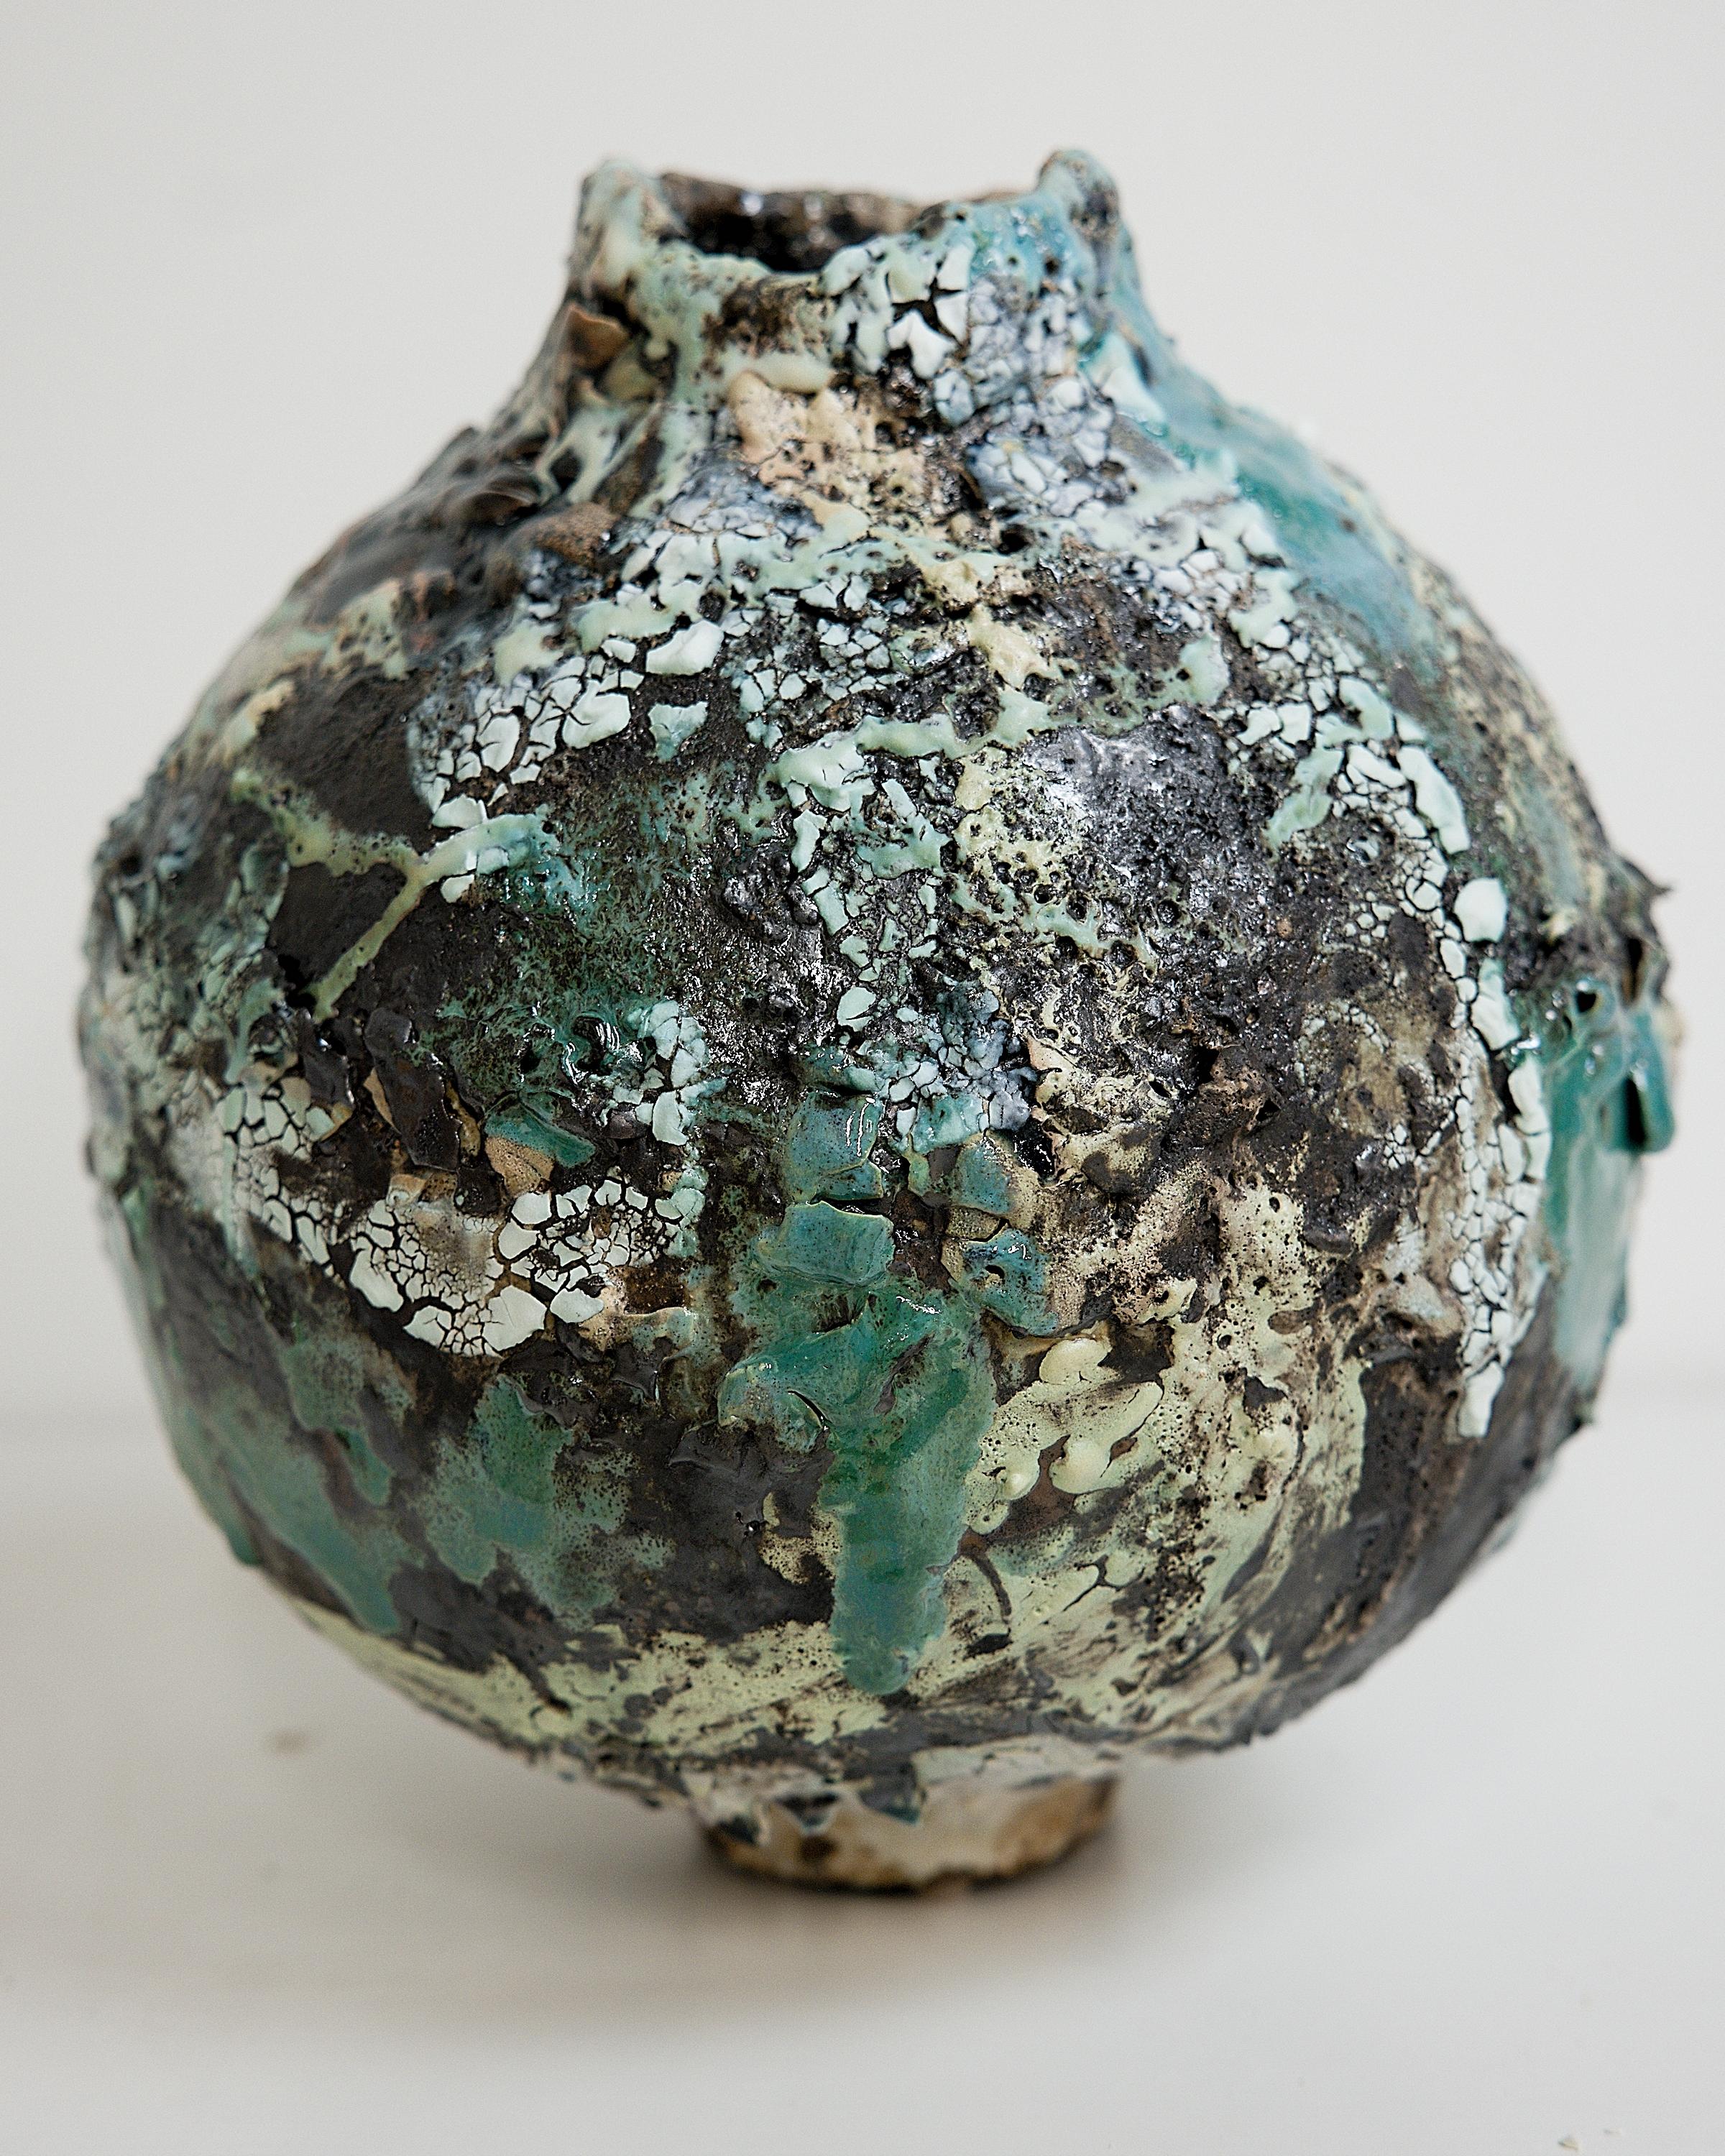 American Winter Moon Cracked Vase !! For Sale